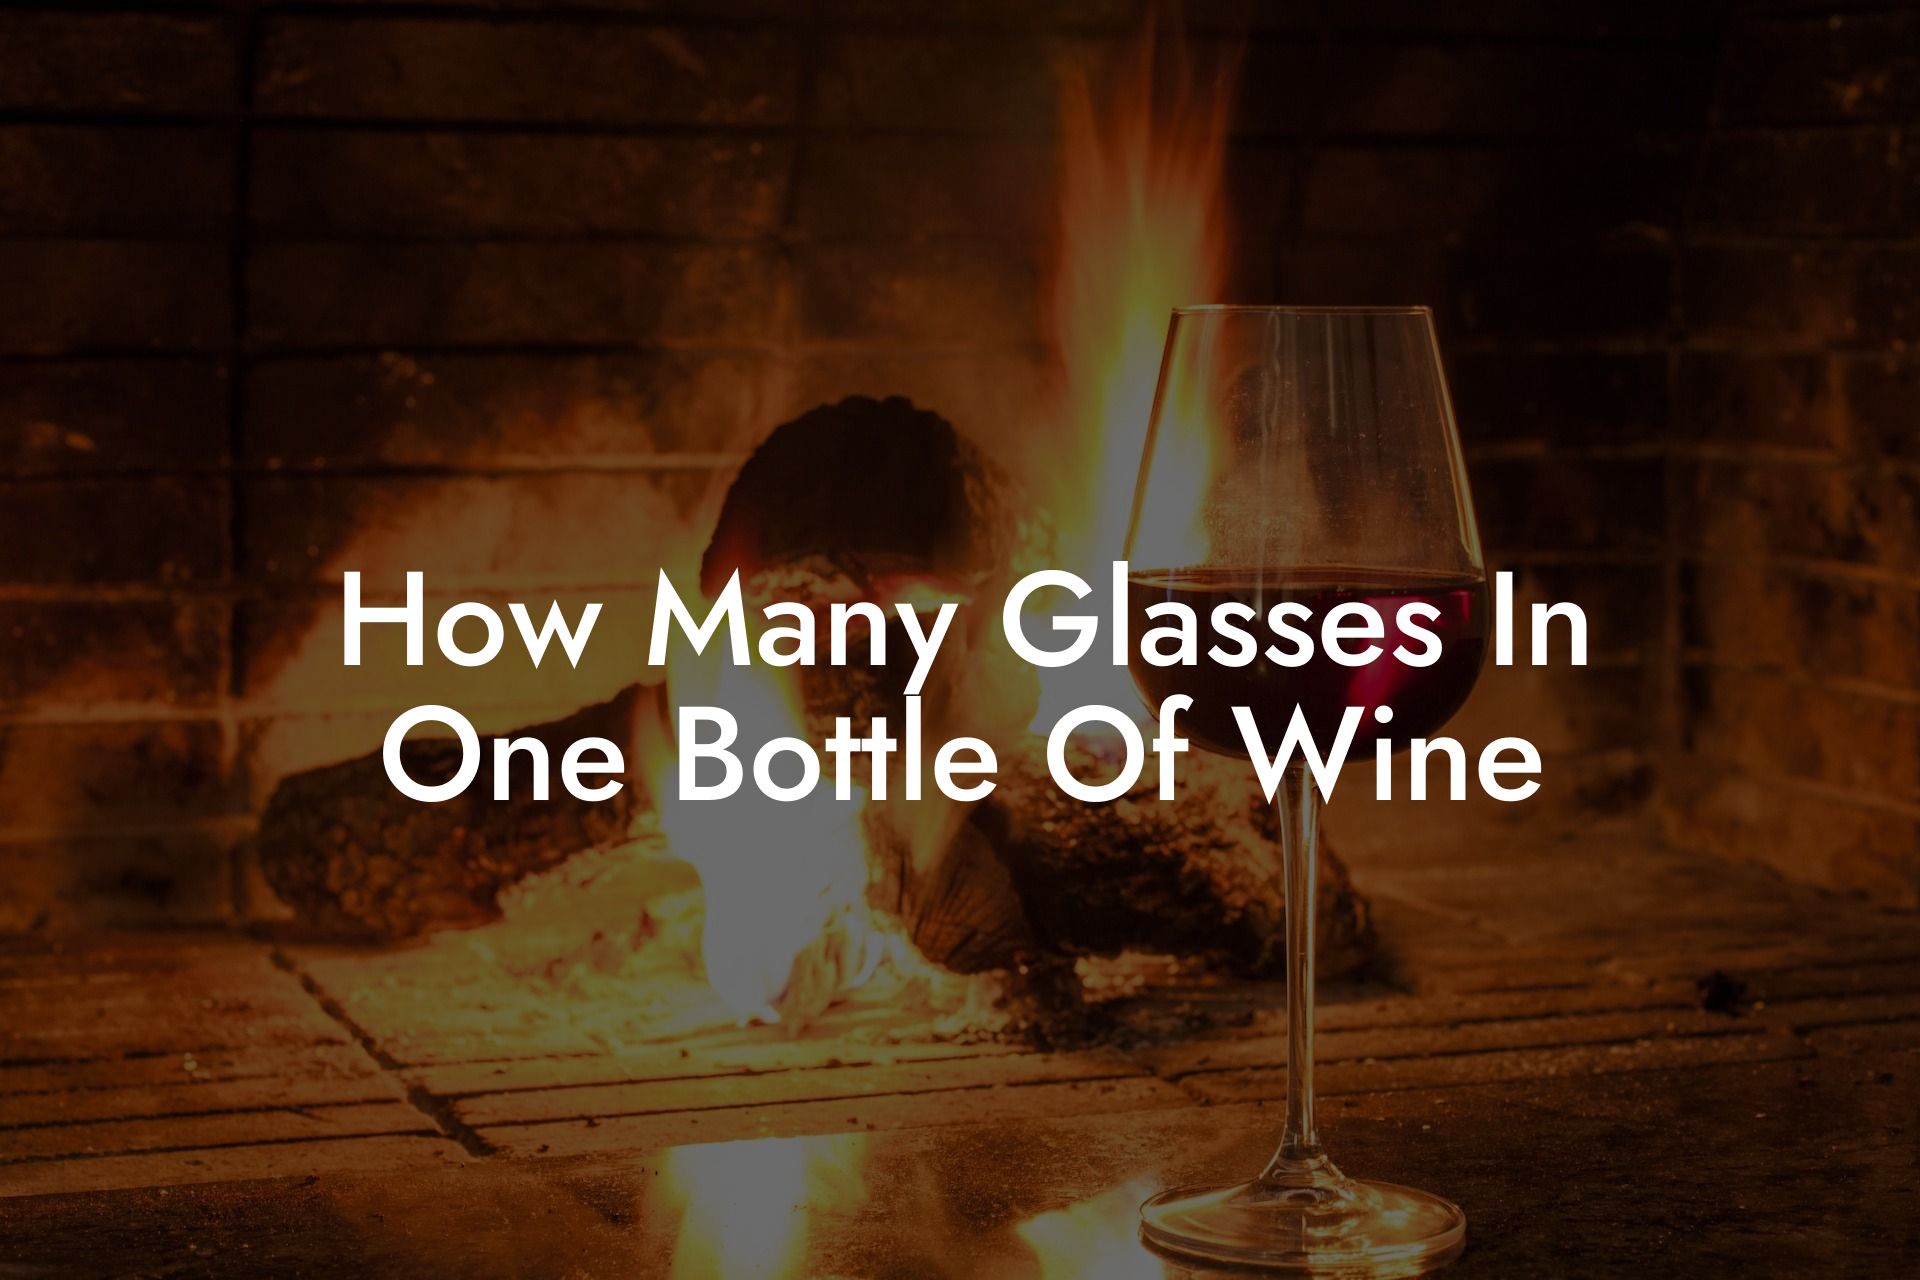 How Many Glasses In One Bottle Of Wine